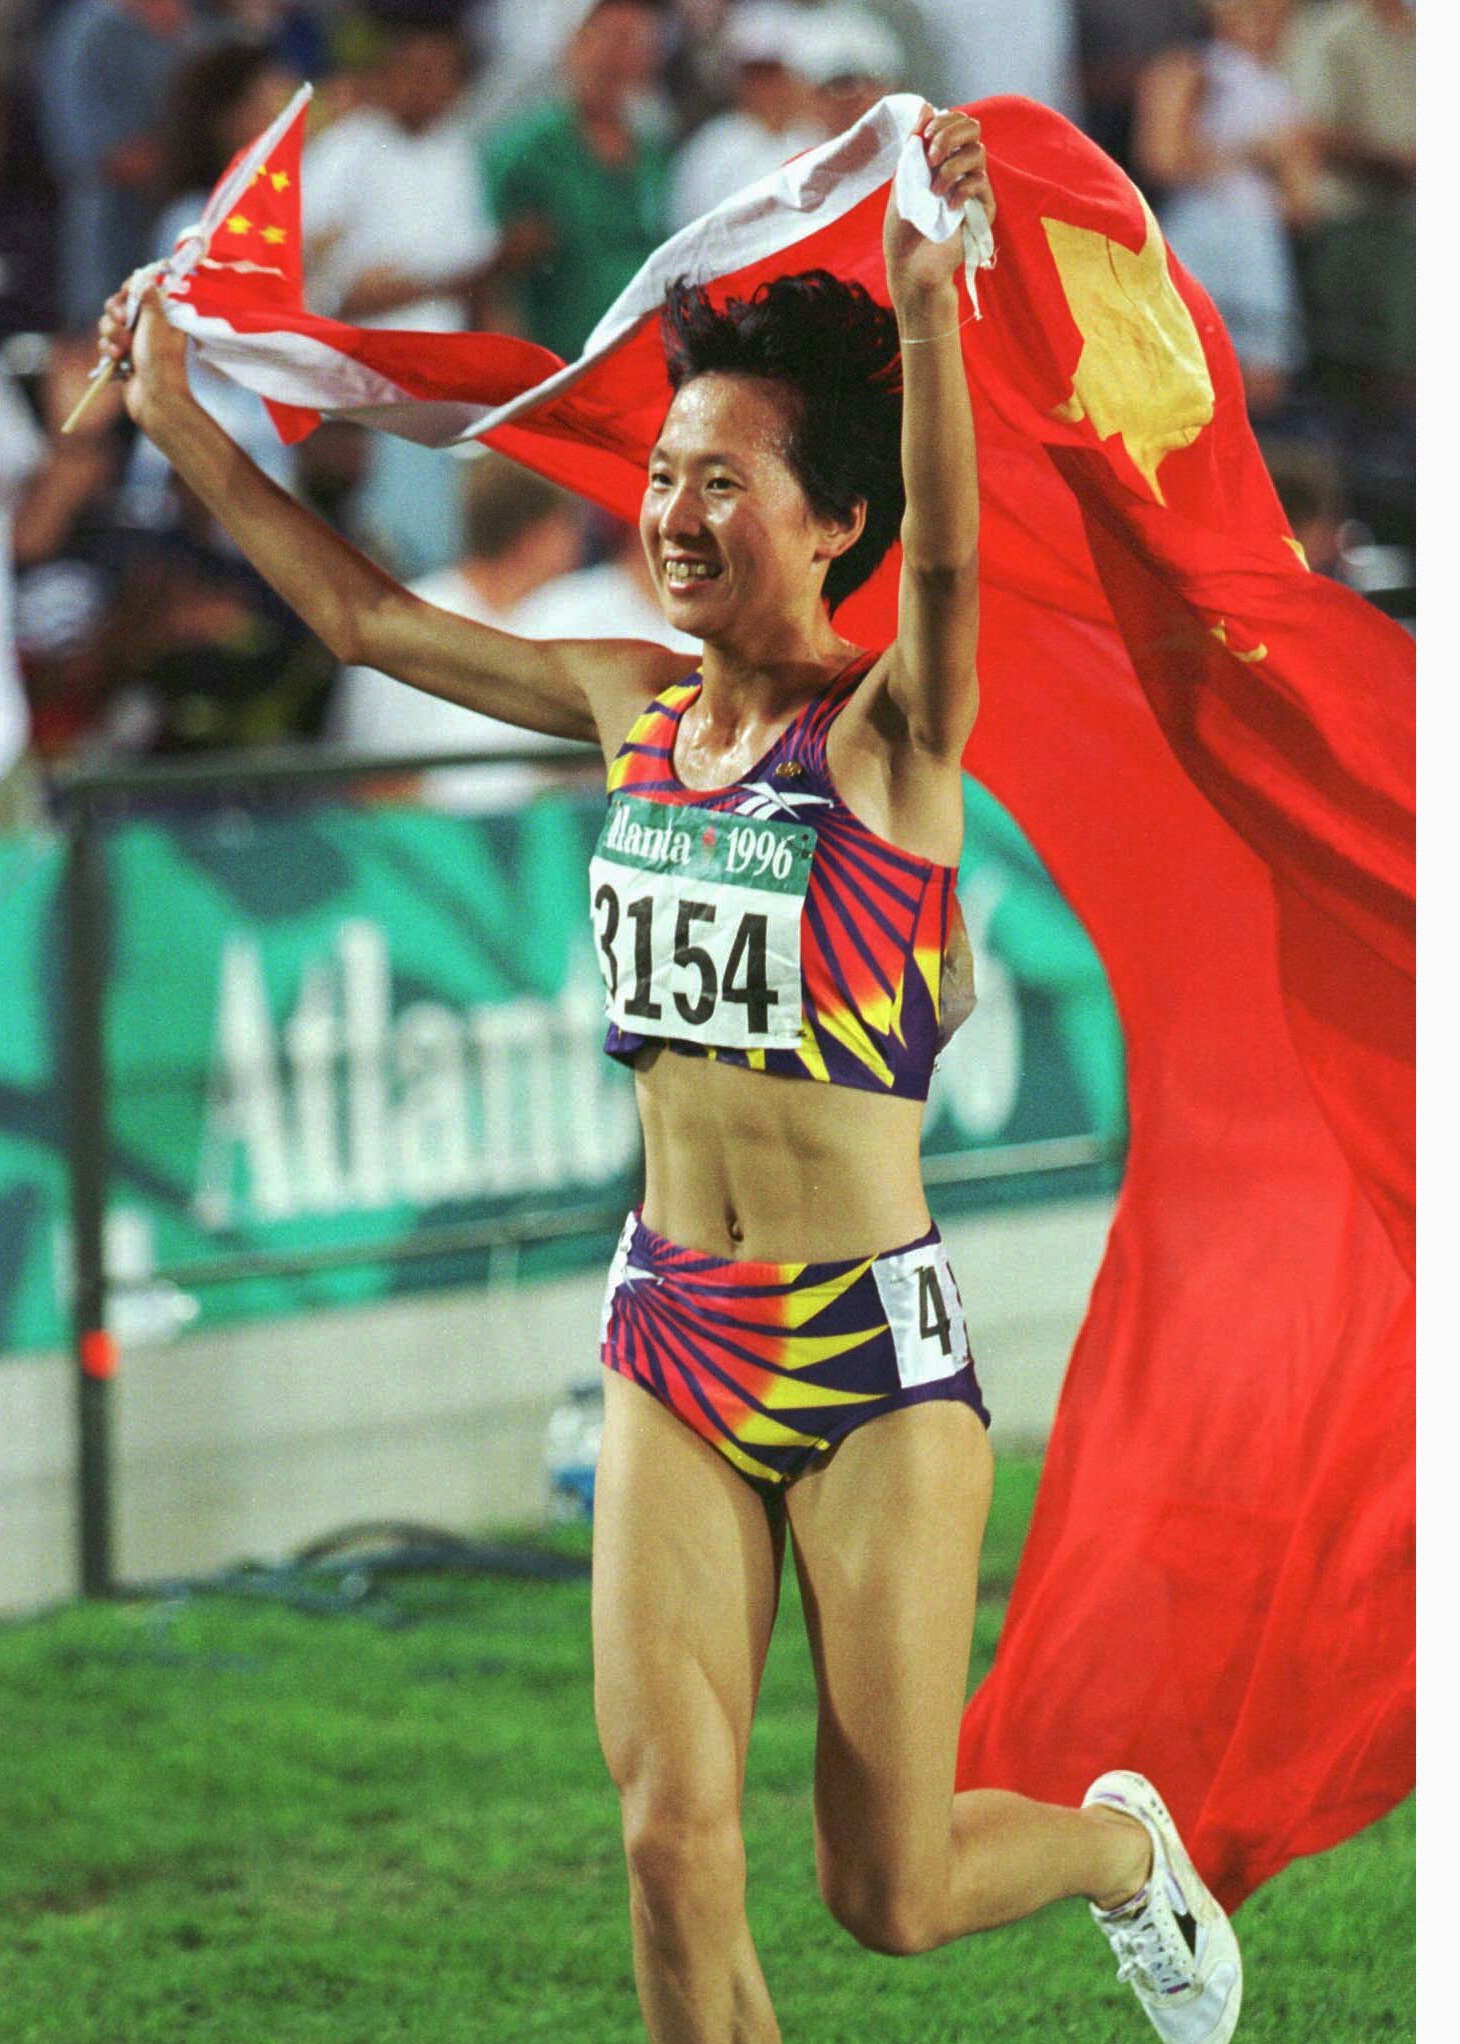 OSP61:OLYMPICS-ATHLETICS: ATLANTA, GA, 28 JUL 96 - Wang Junxia of China celebrates with her country's flag after winning the women's 5000 meter event to earn the Gold medal July 28 at the Olympic stadium in Atlanta. fsp/Photo by Jerry Lampen REUTERS